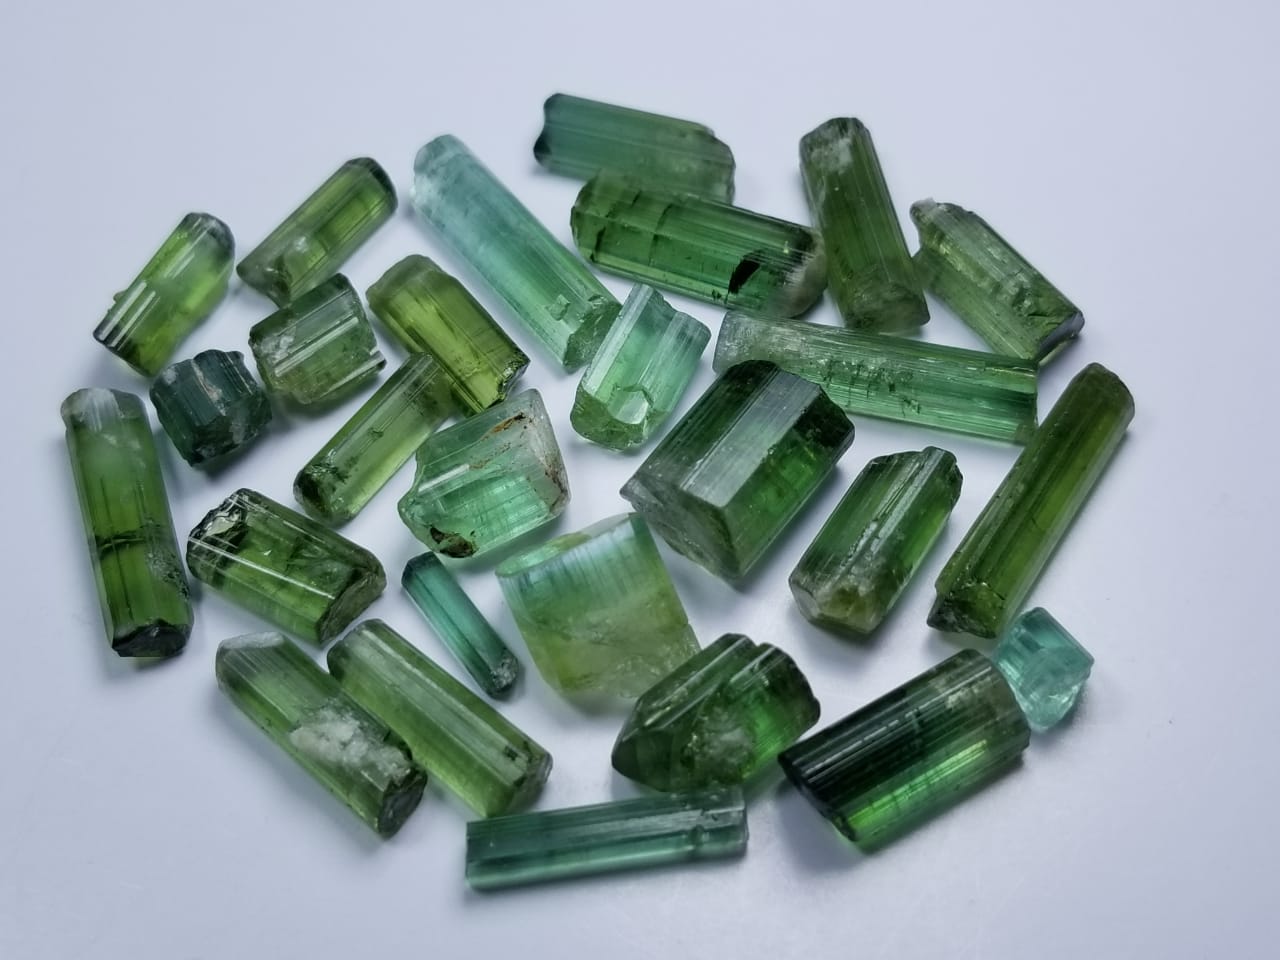 Green Tourmaline crystals lot Available Sourced from Afghanistan Mines